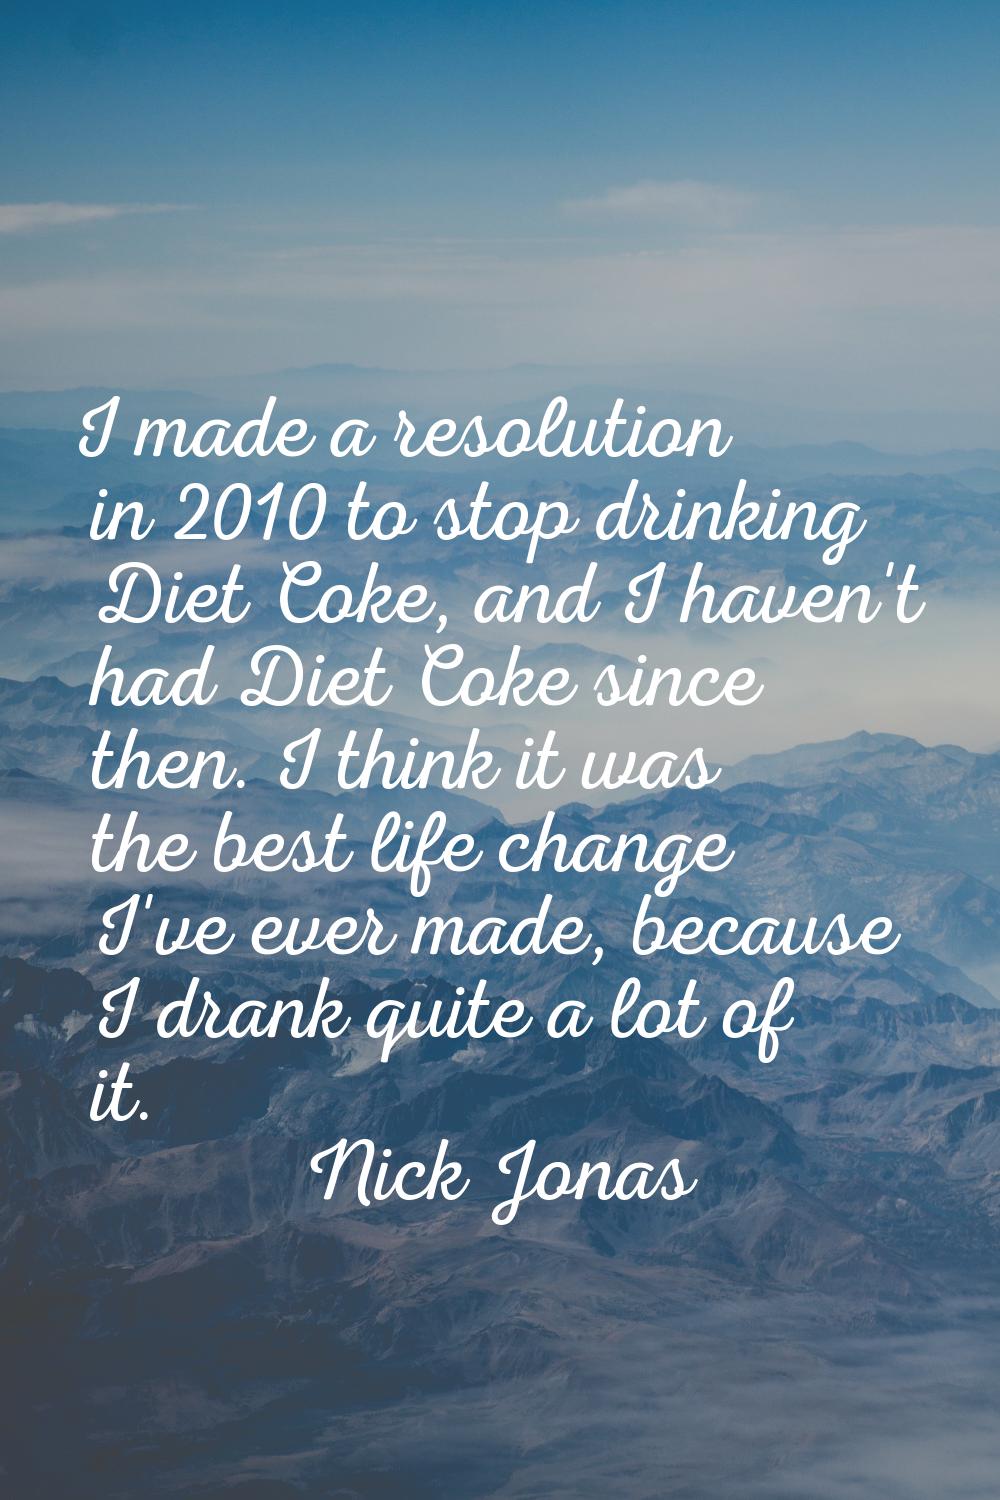 I made a resolution in 2010 to stop drinking Diet Coke, and I haven't had Diet Coke since then. I t